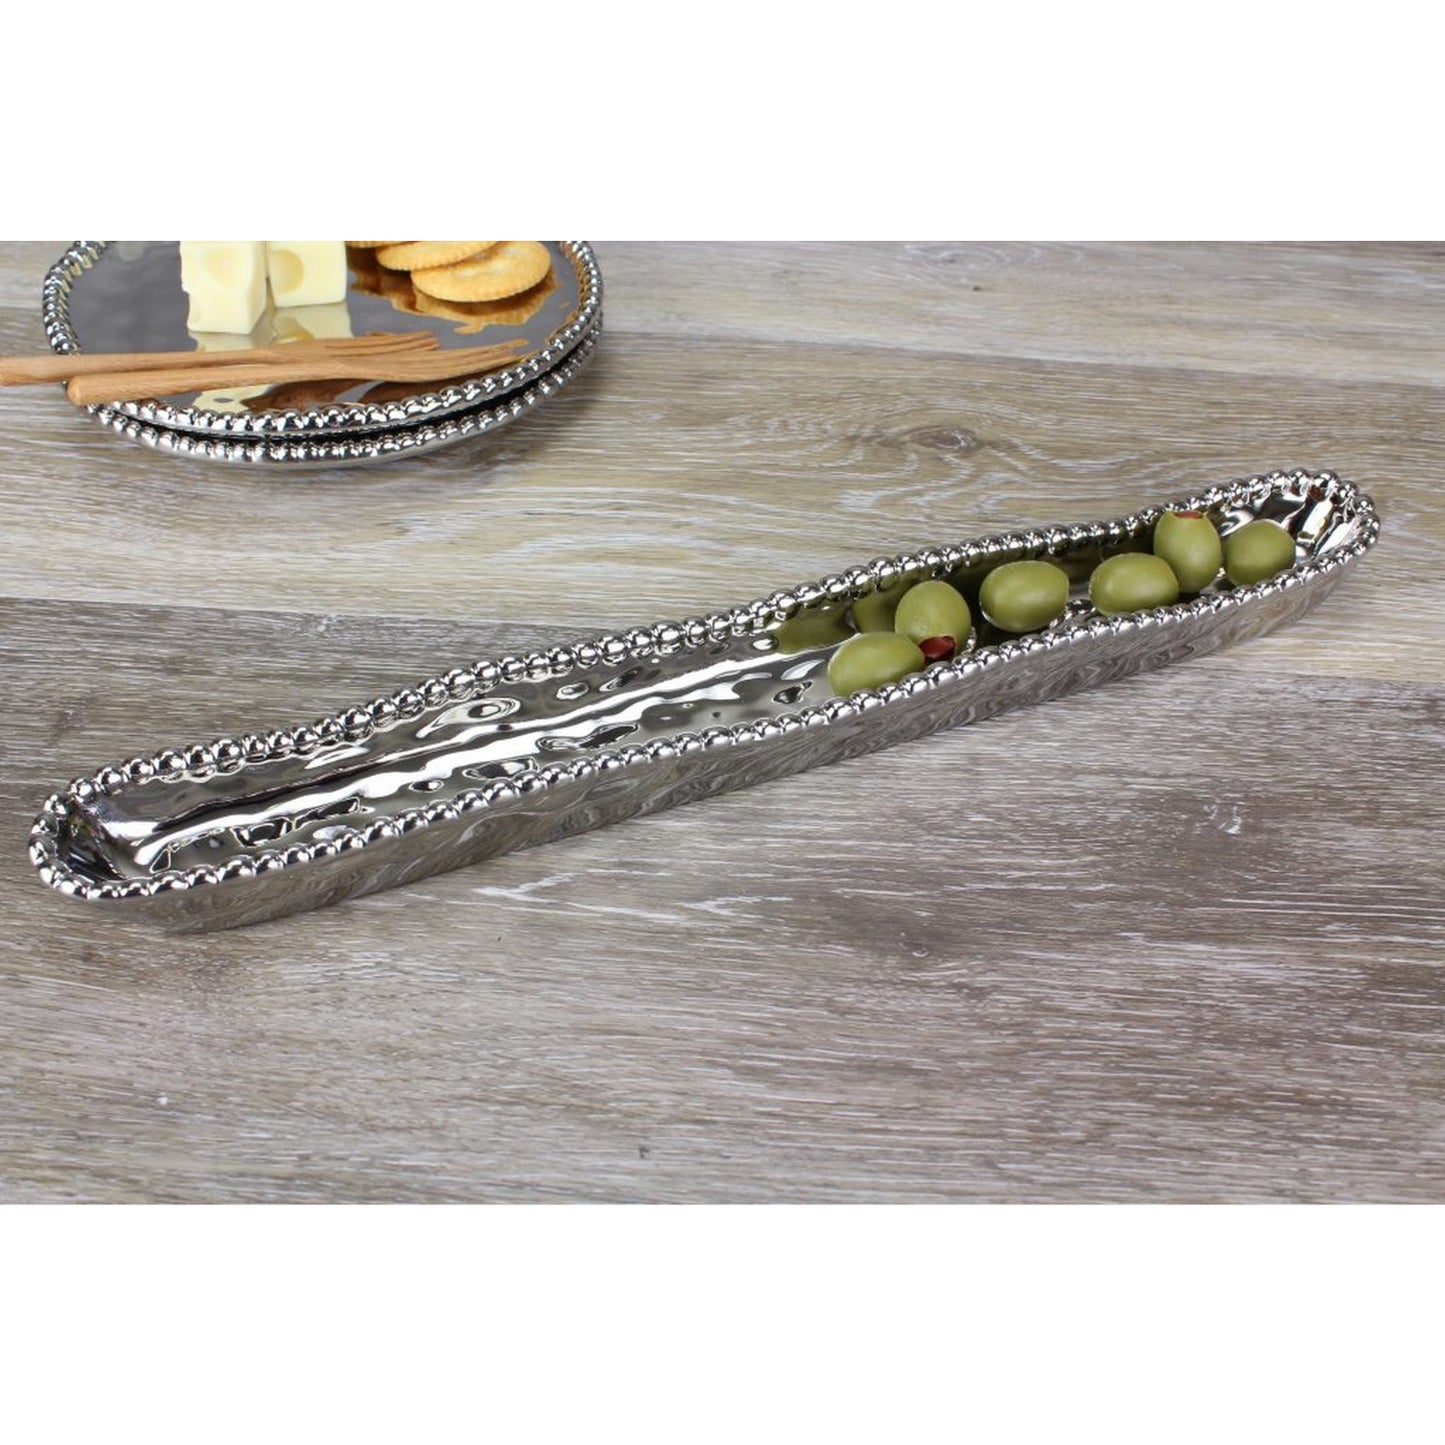 Pampa Bay Porcelain Olive Serving Dish, Silver, 1.75 x 14 inches